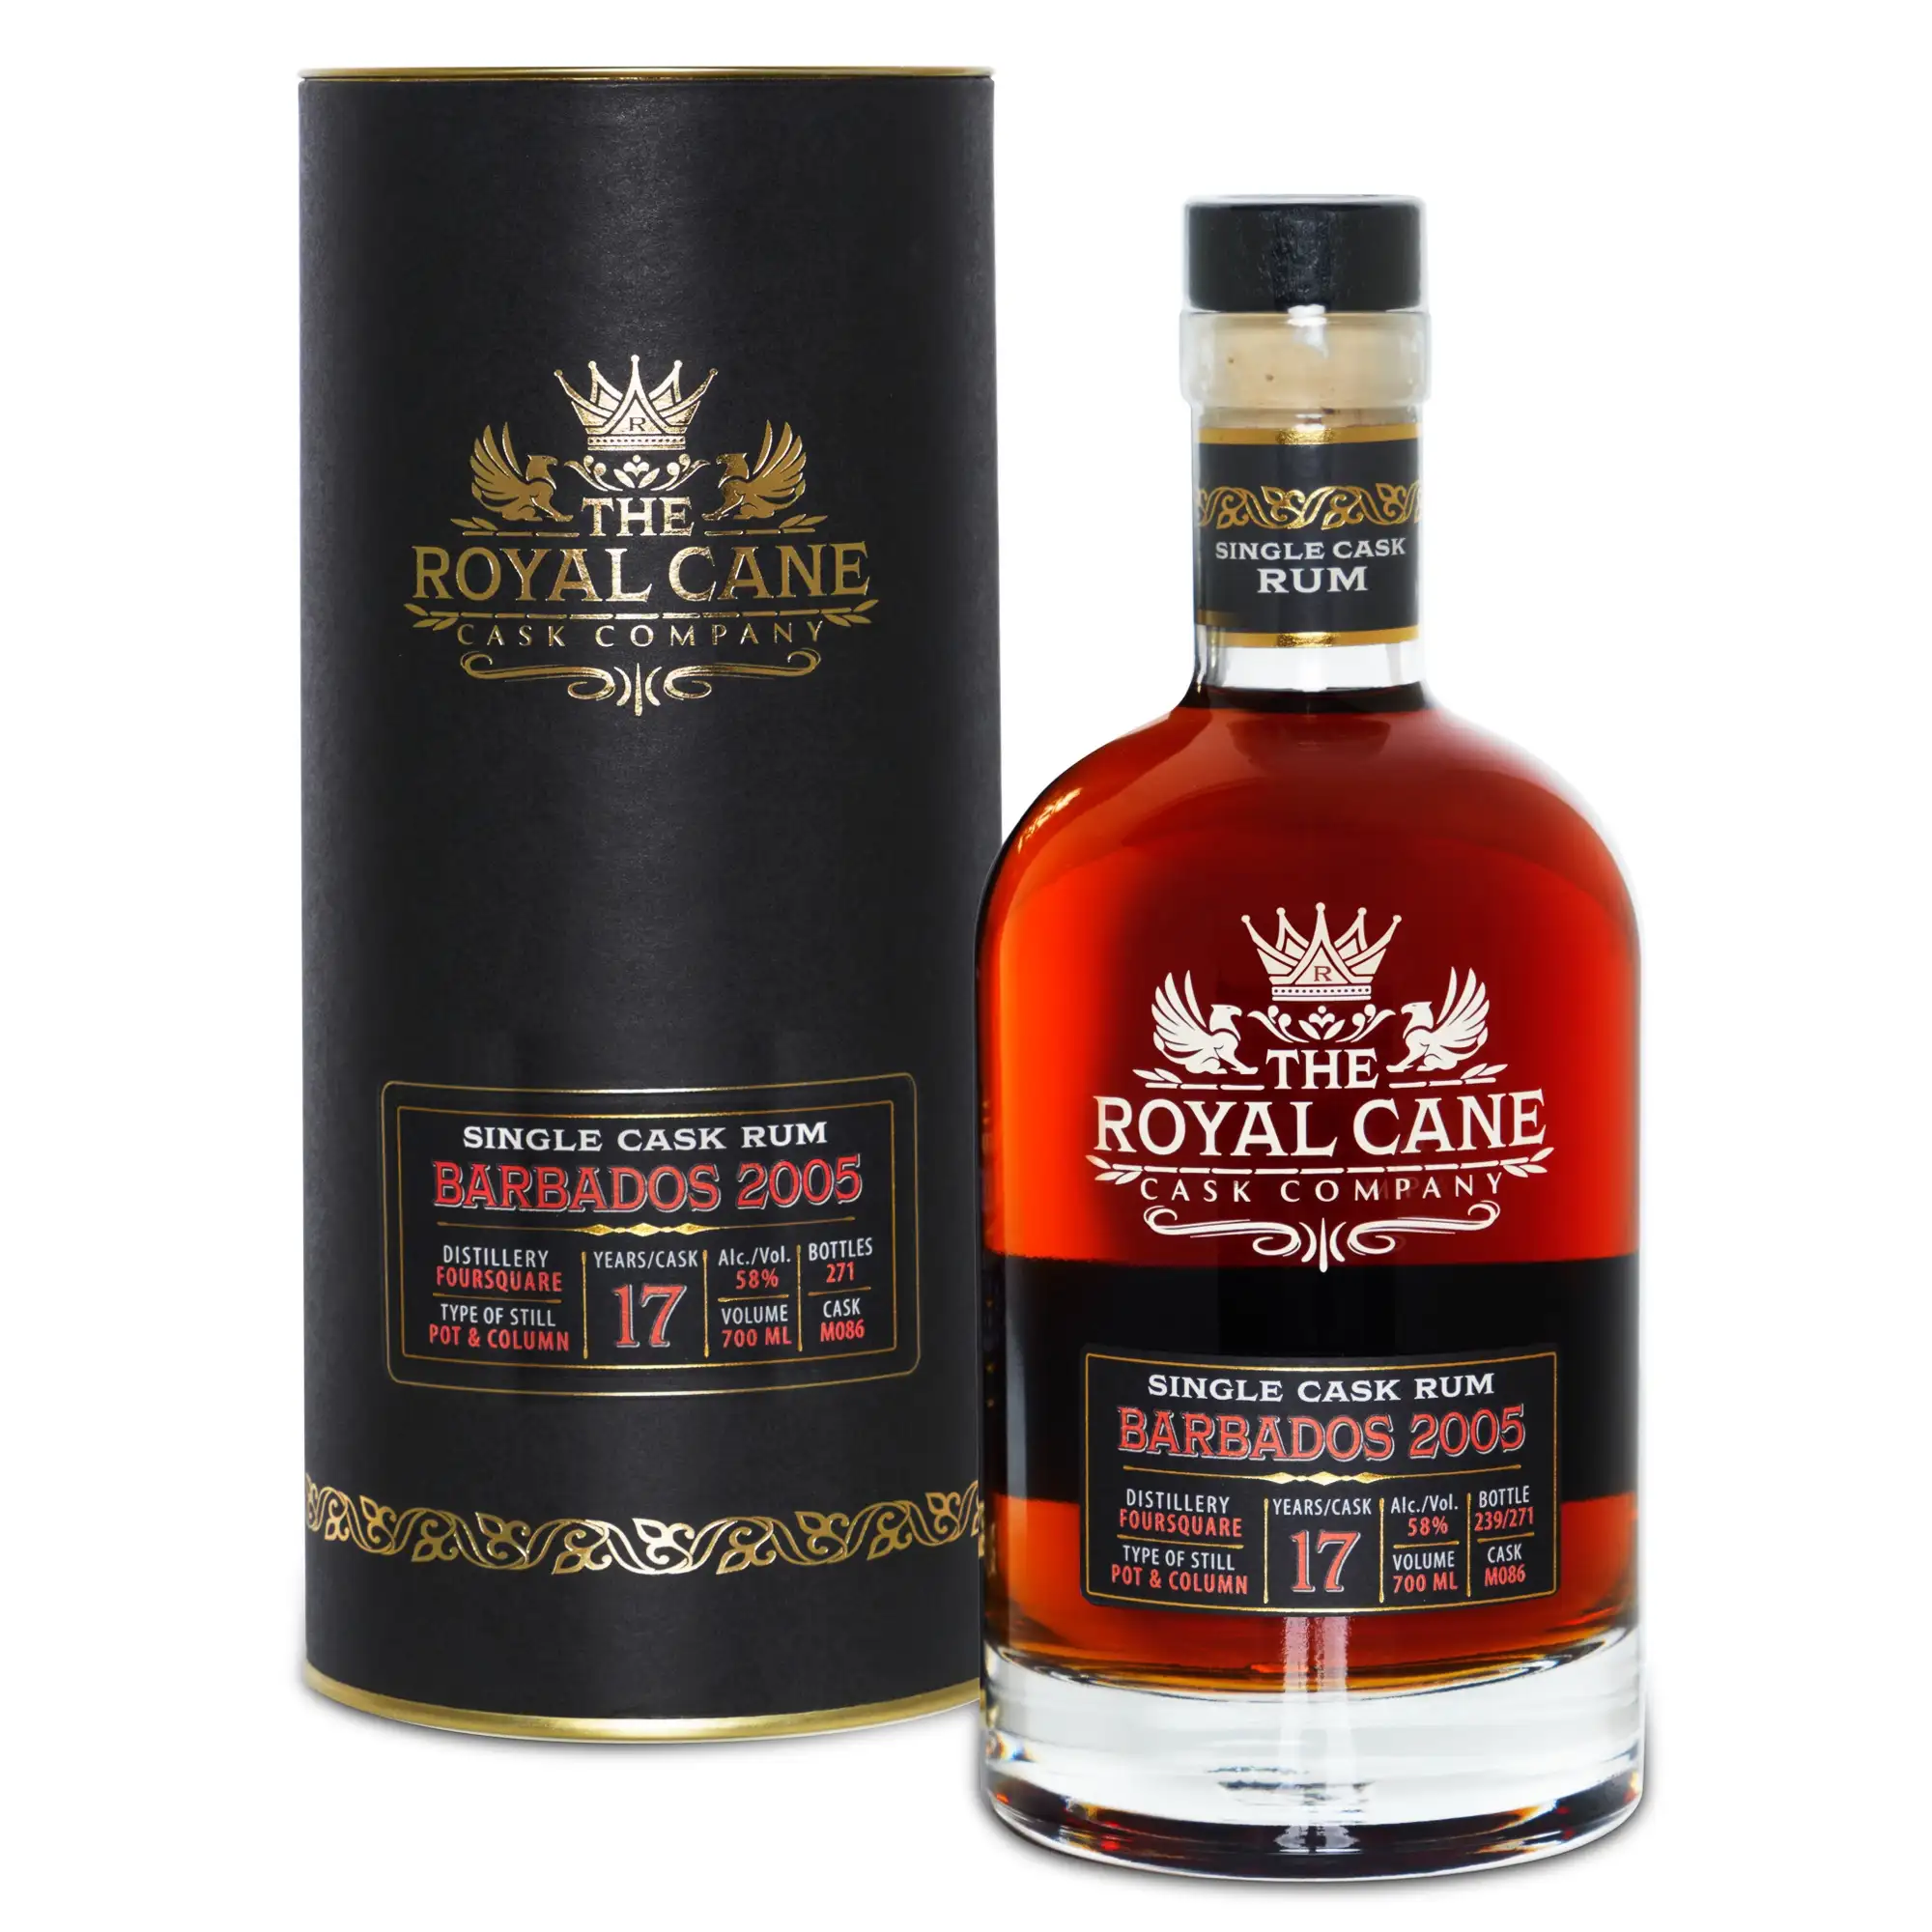 Image of the front of the bottle of the rum The Royal Cane Cask Company Single Cask Rum